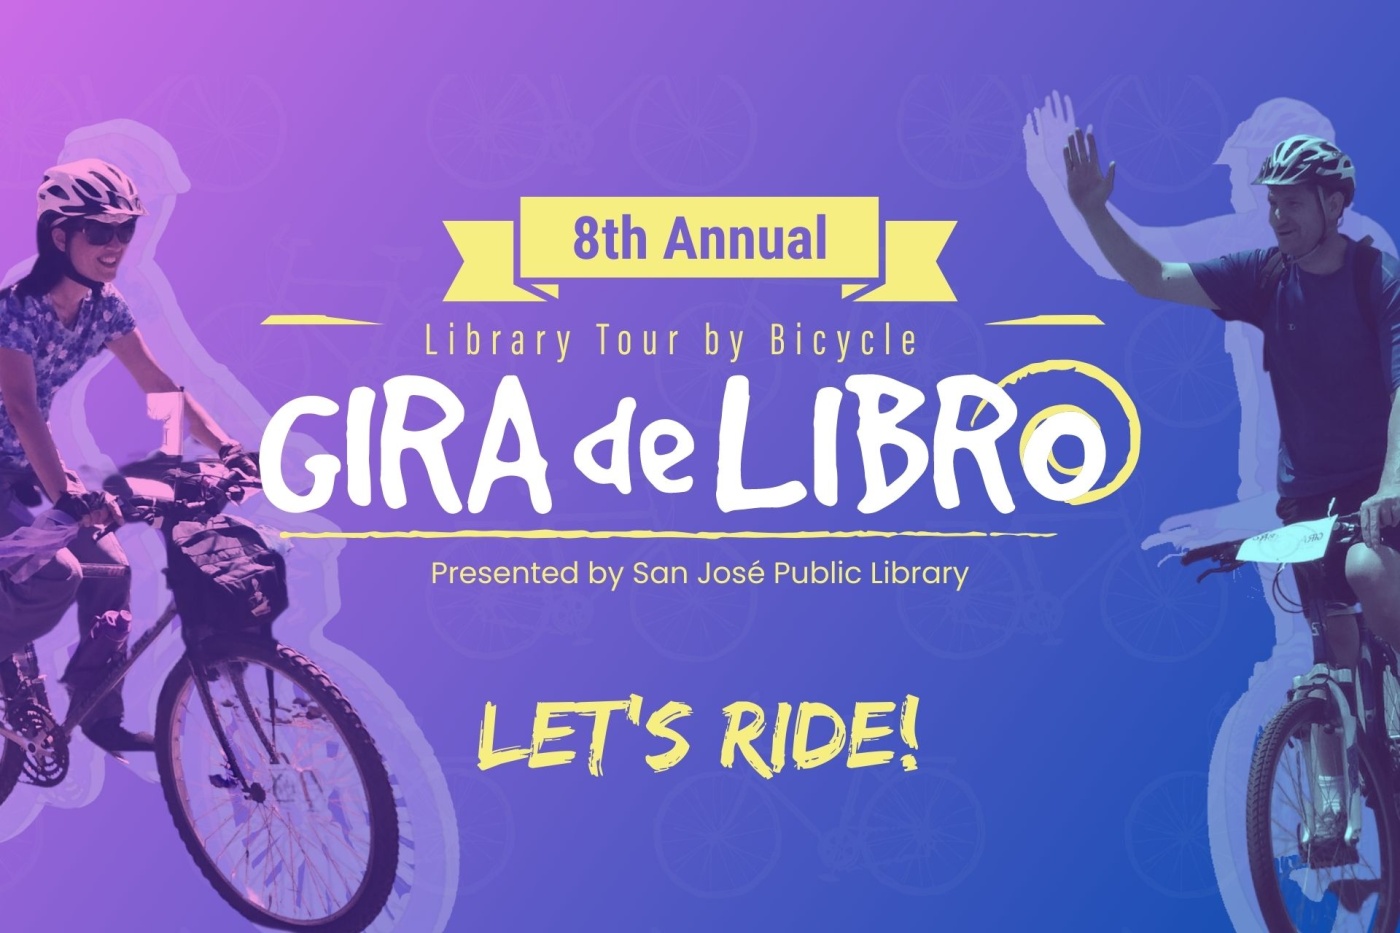 Two bicyclists surround the Gira de Libro logo with the including tagline, "Let's Ride."